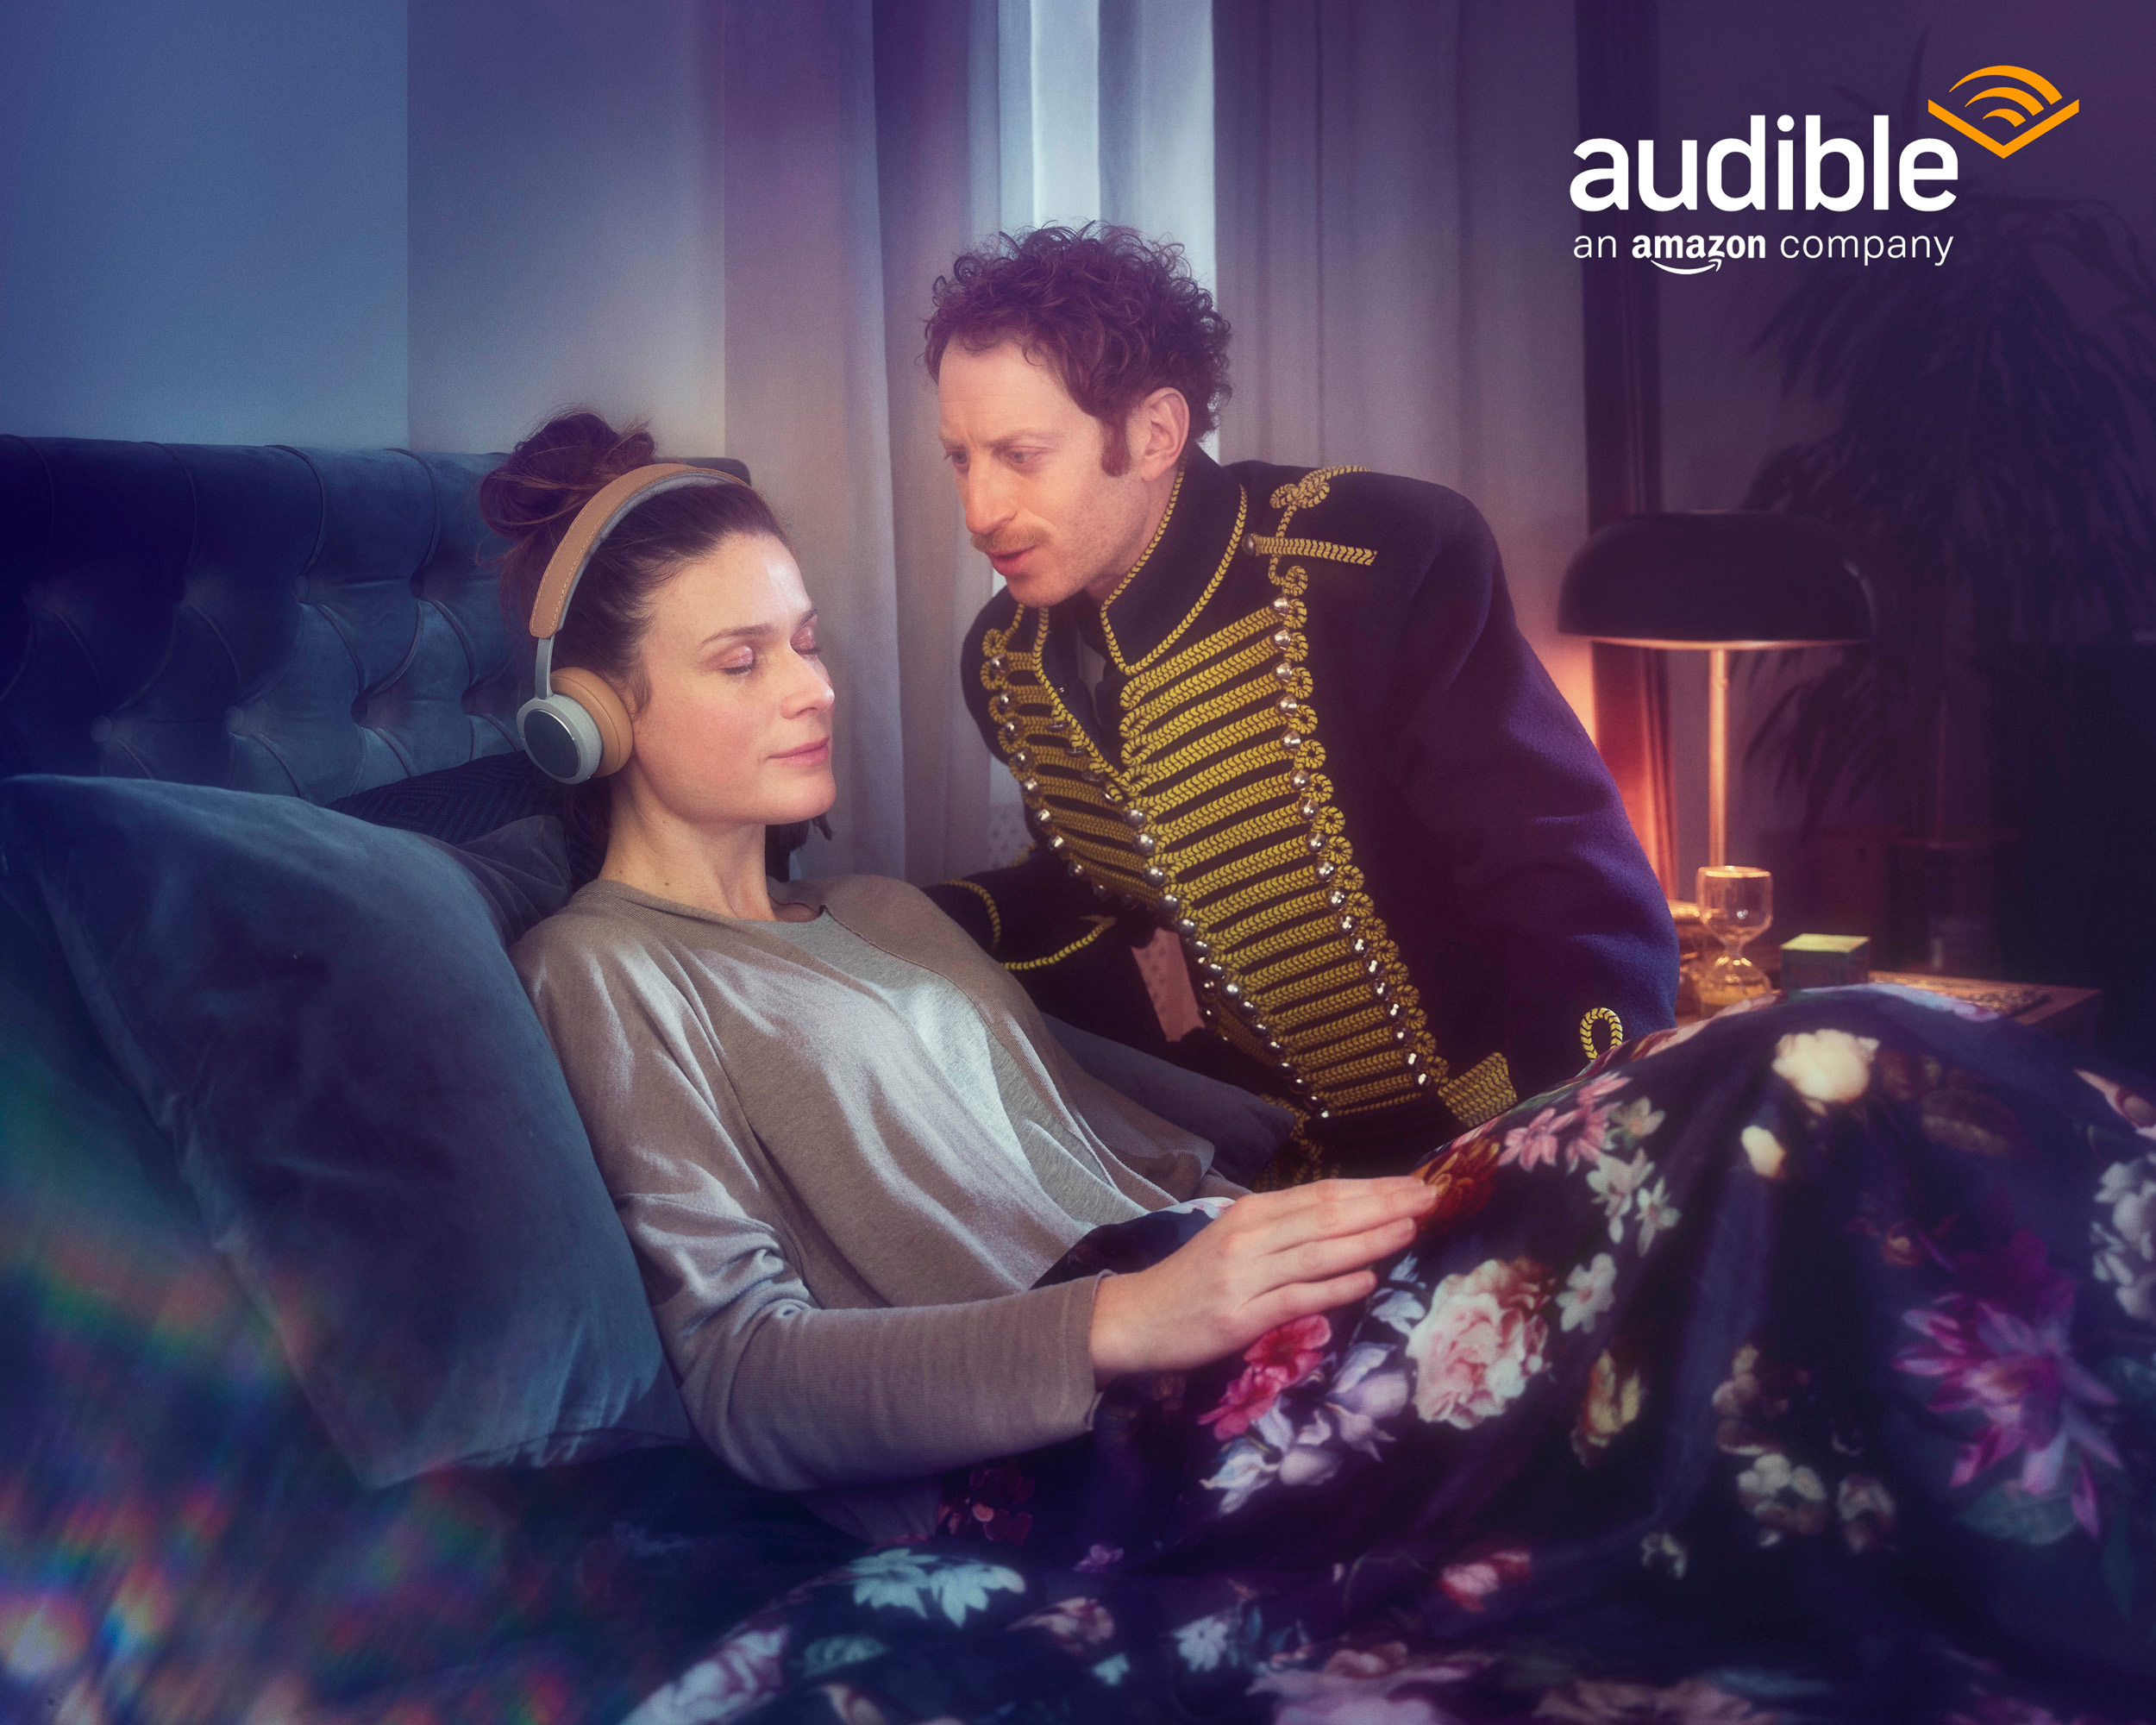 February 2021 – New Campaign for Audible